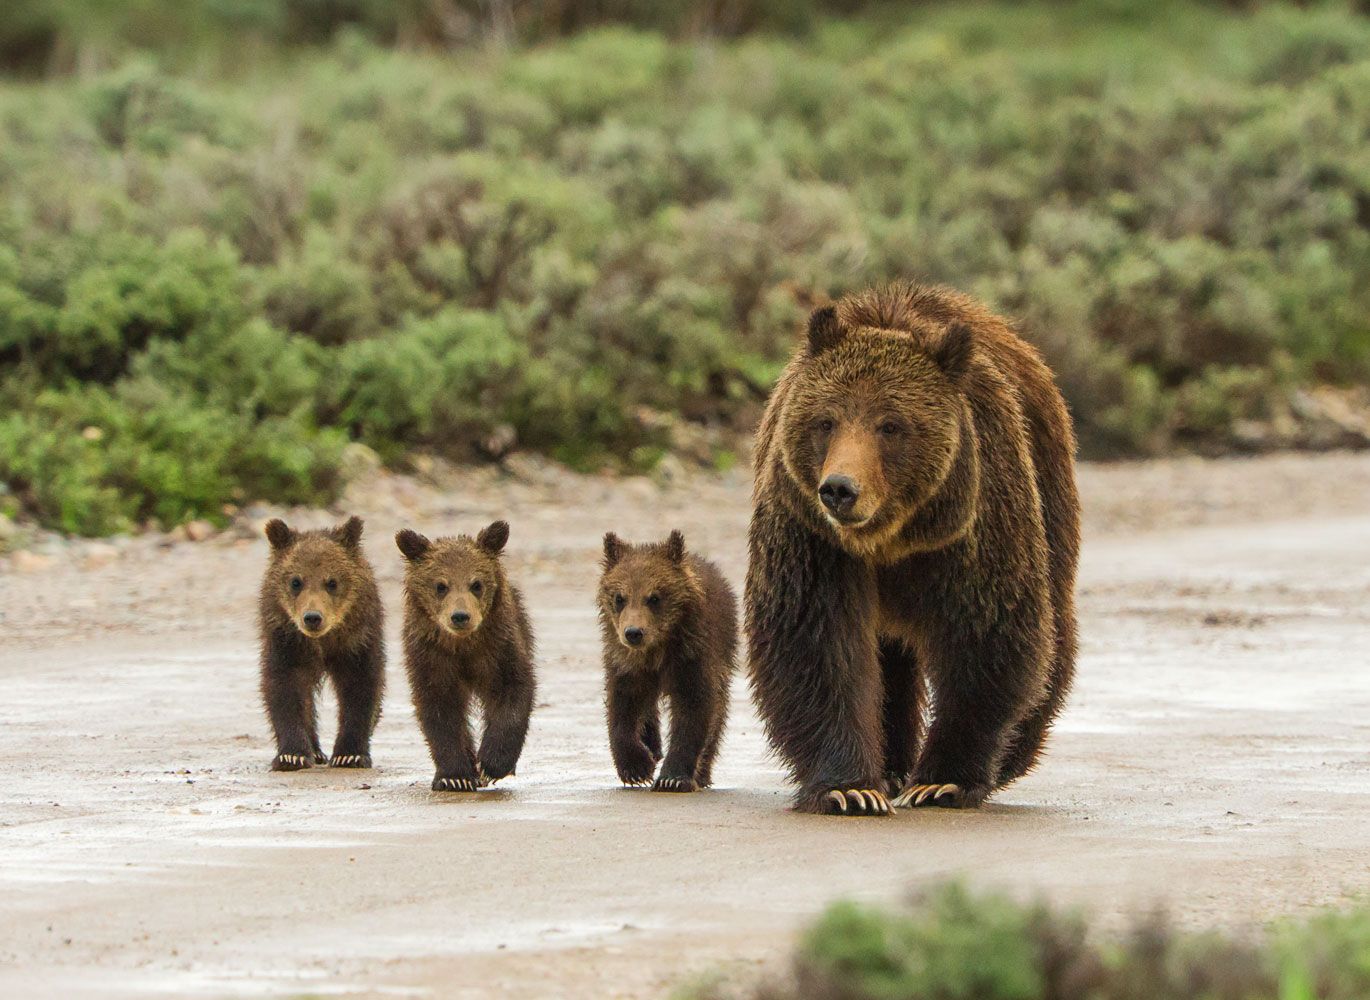 Grizzly 399 walking with her cubs.